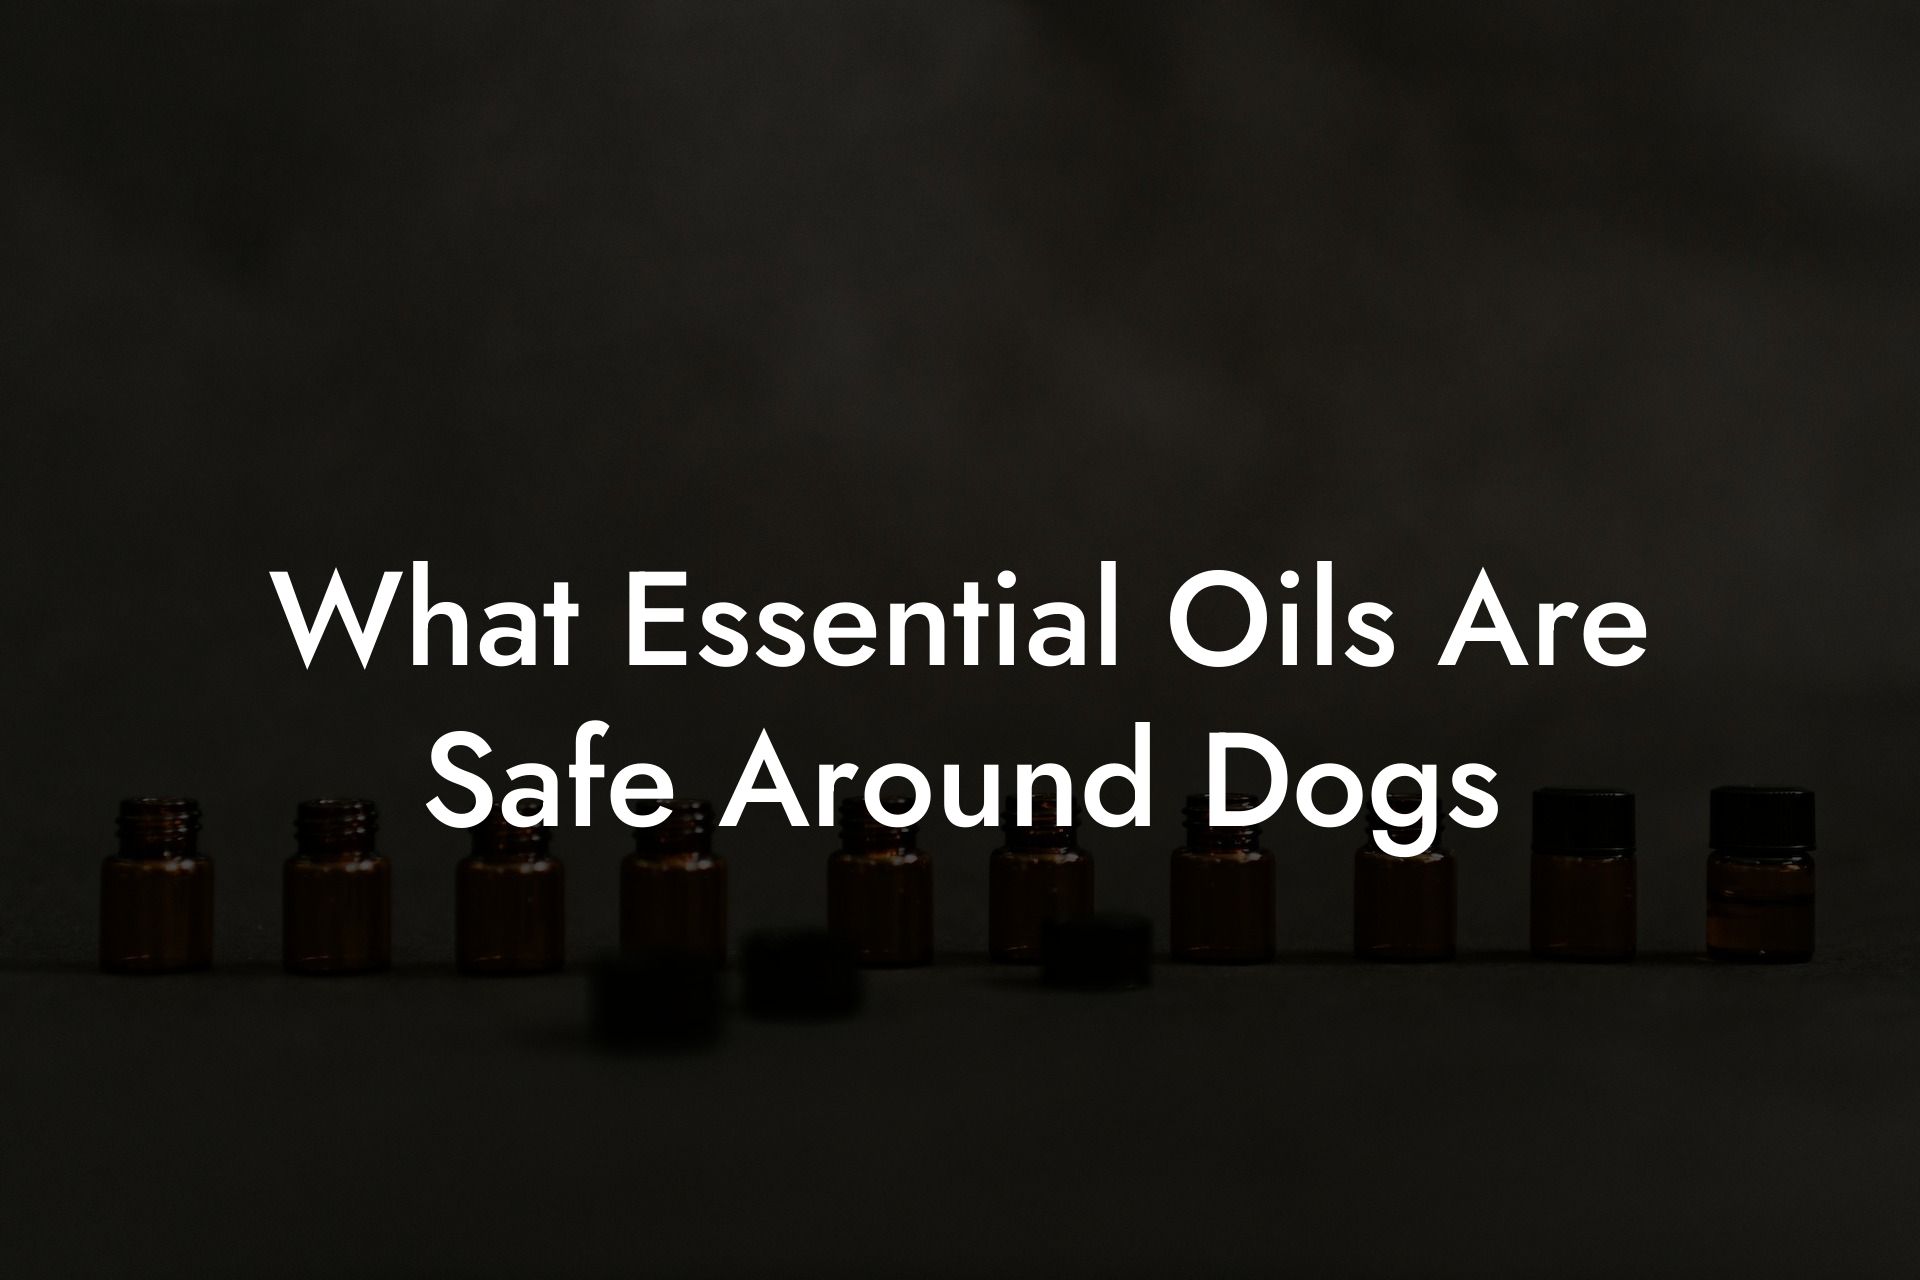 What Essential Oils Are Safe Around Dogs